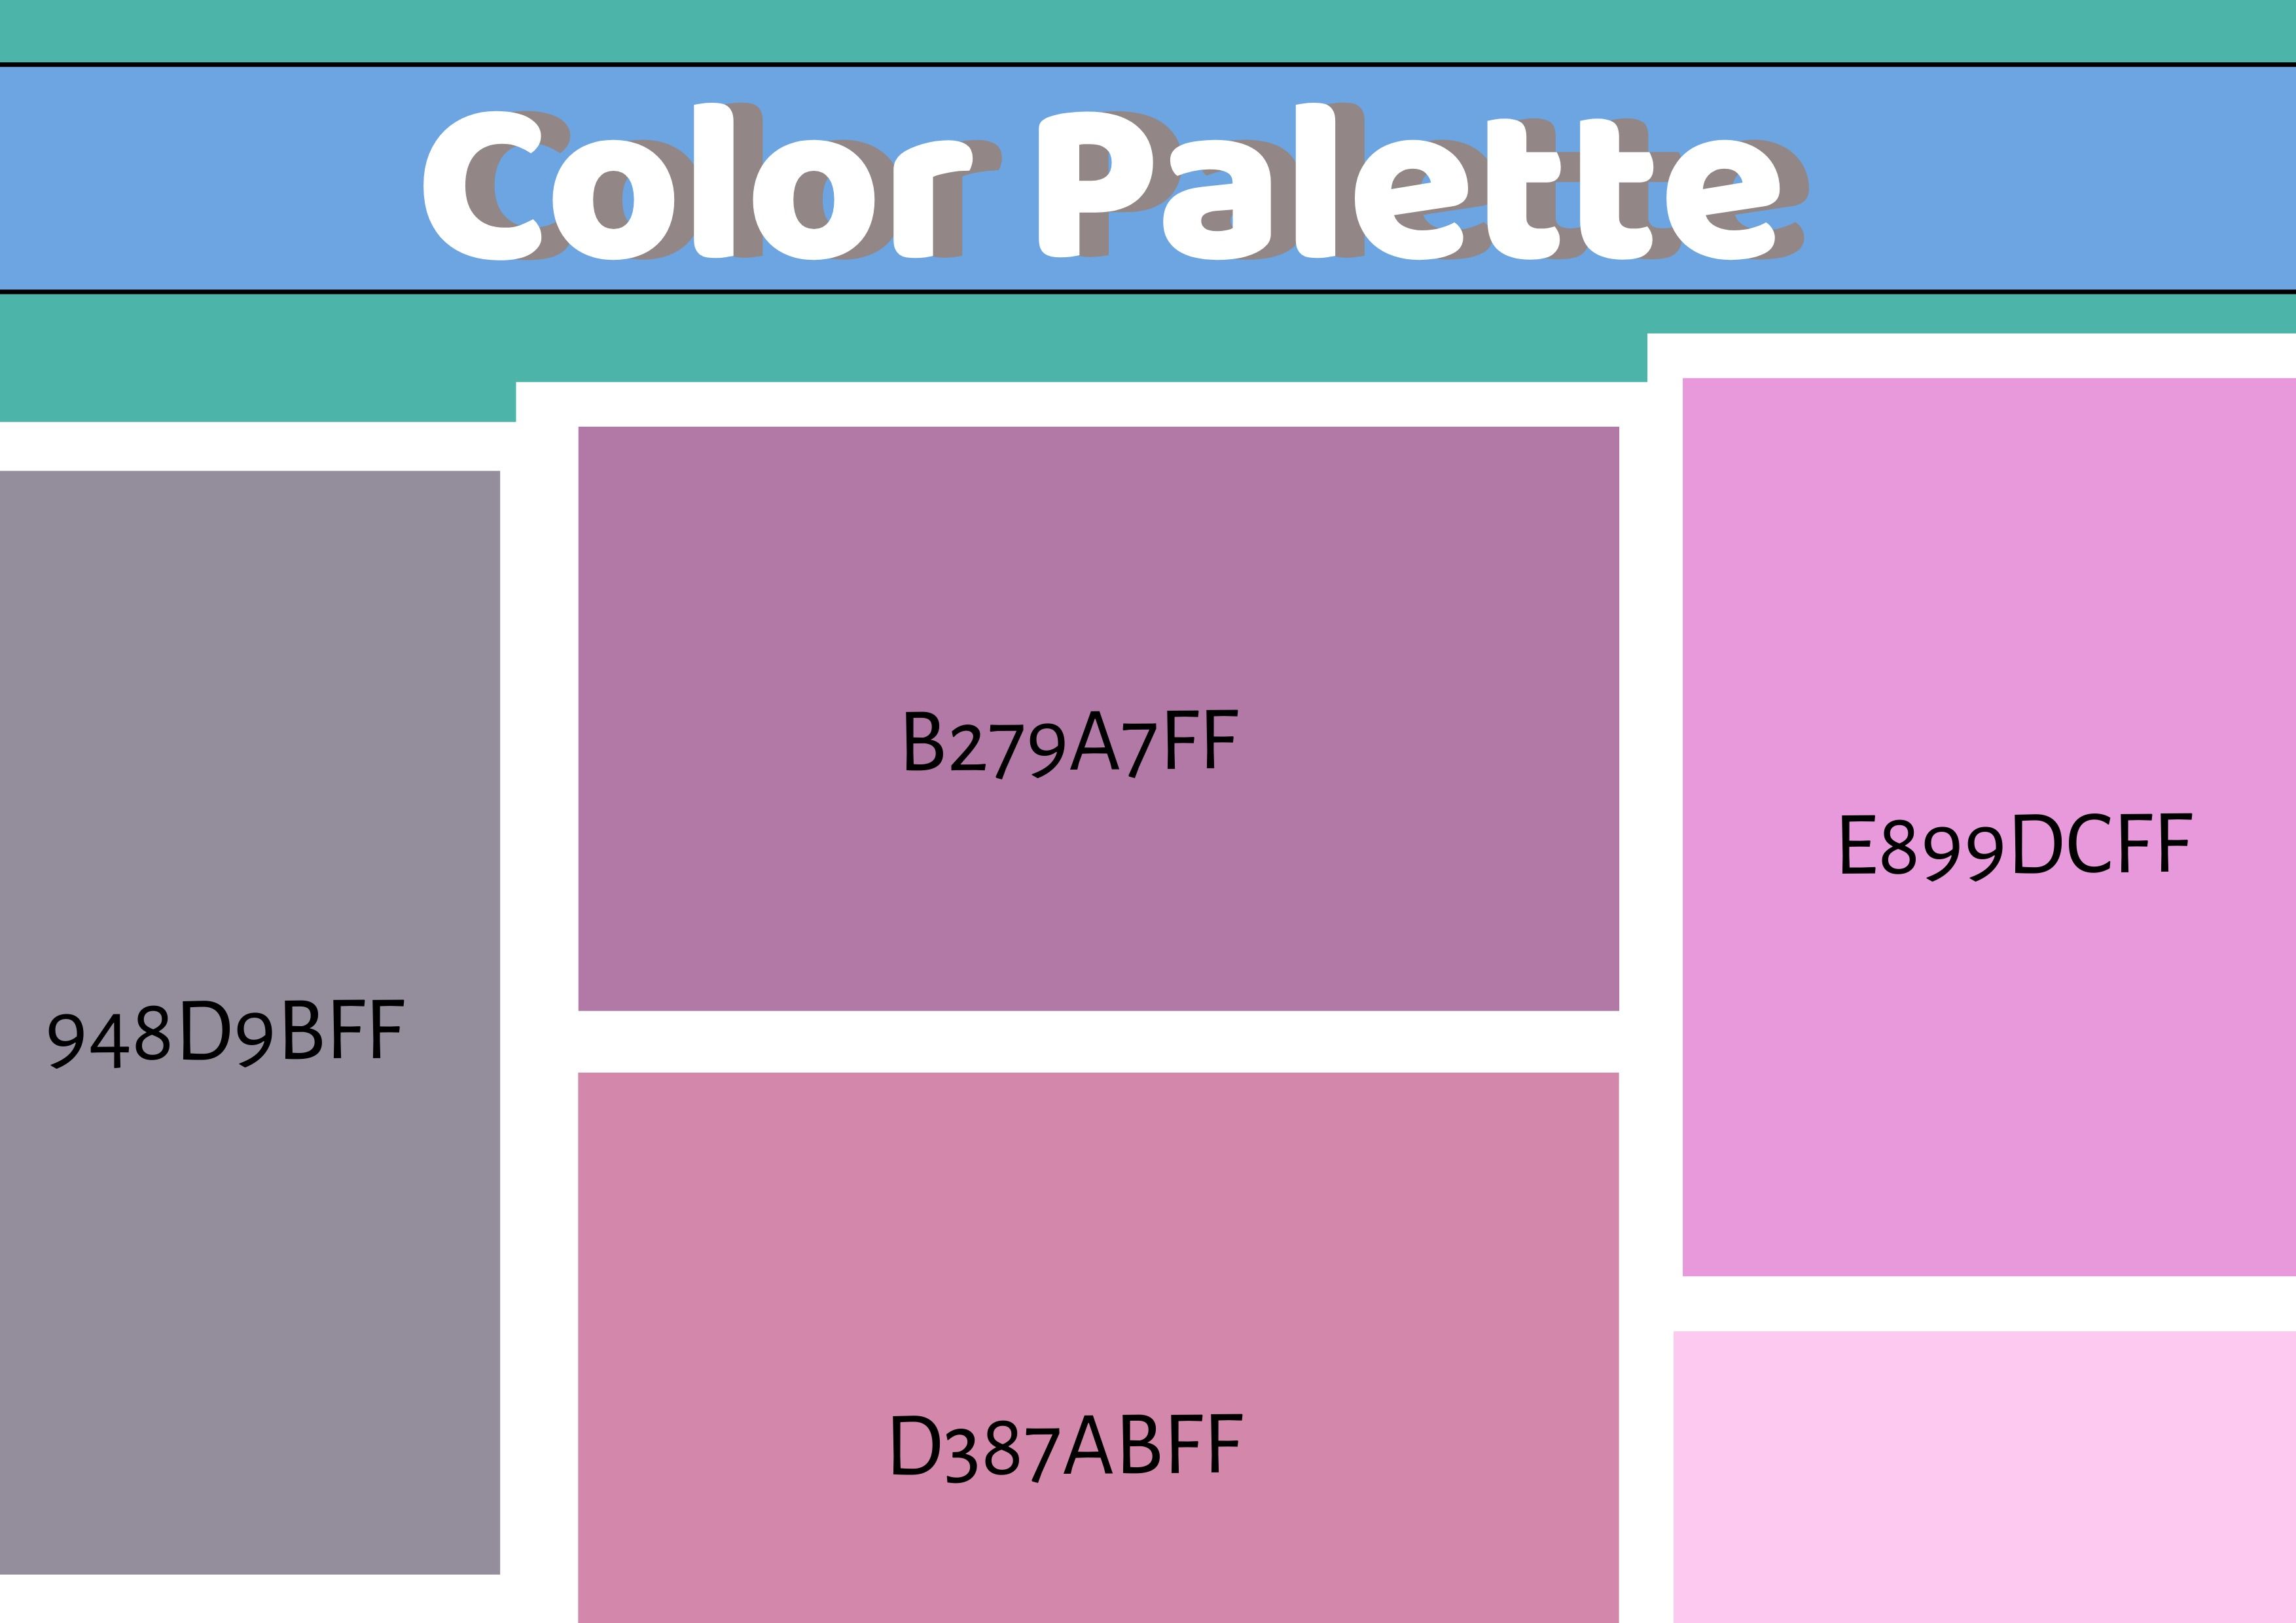 Color Palette image with an accompanying hex values - Evoke the right emotions with your brand's color palette - Image